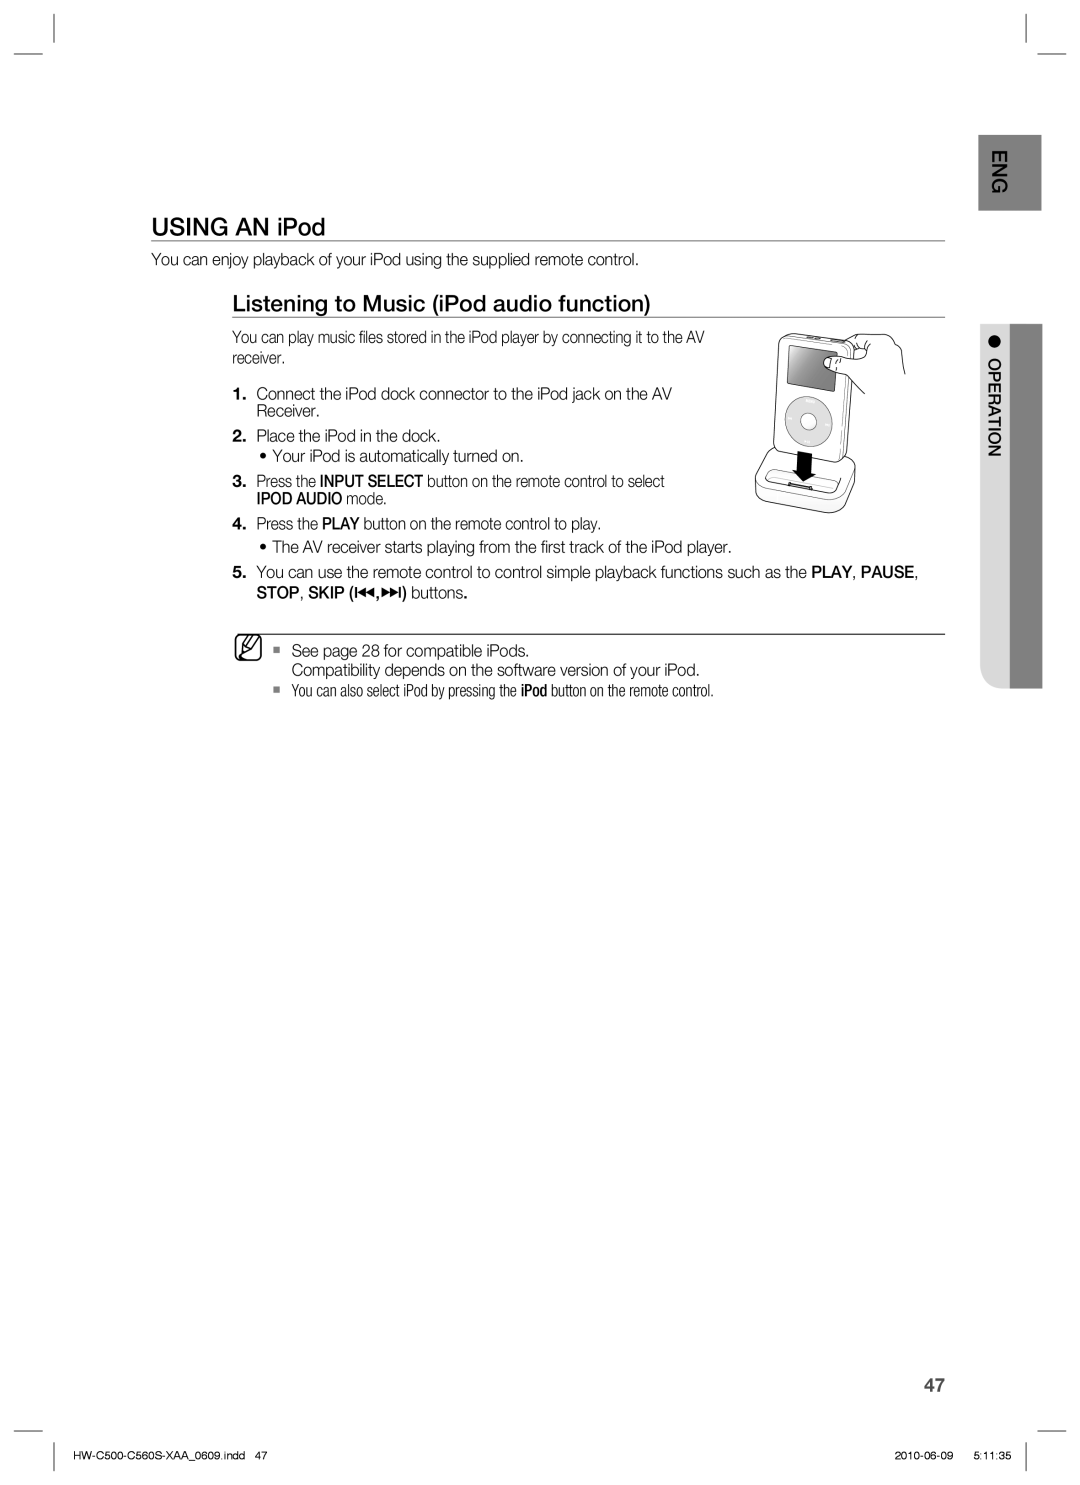 Samsung HW-C560S, HW-C500 user manual USING AN iPod, Listening to Music iPod audio function 